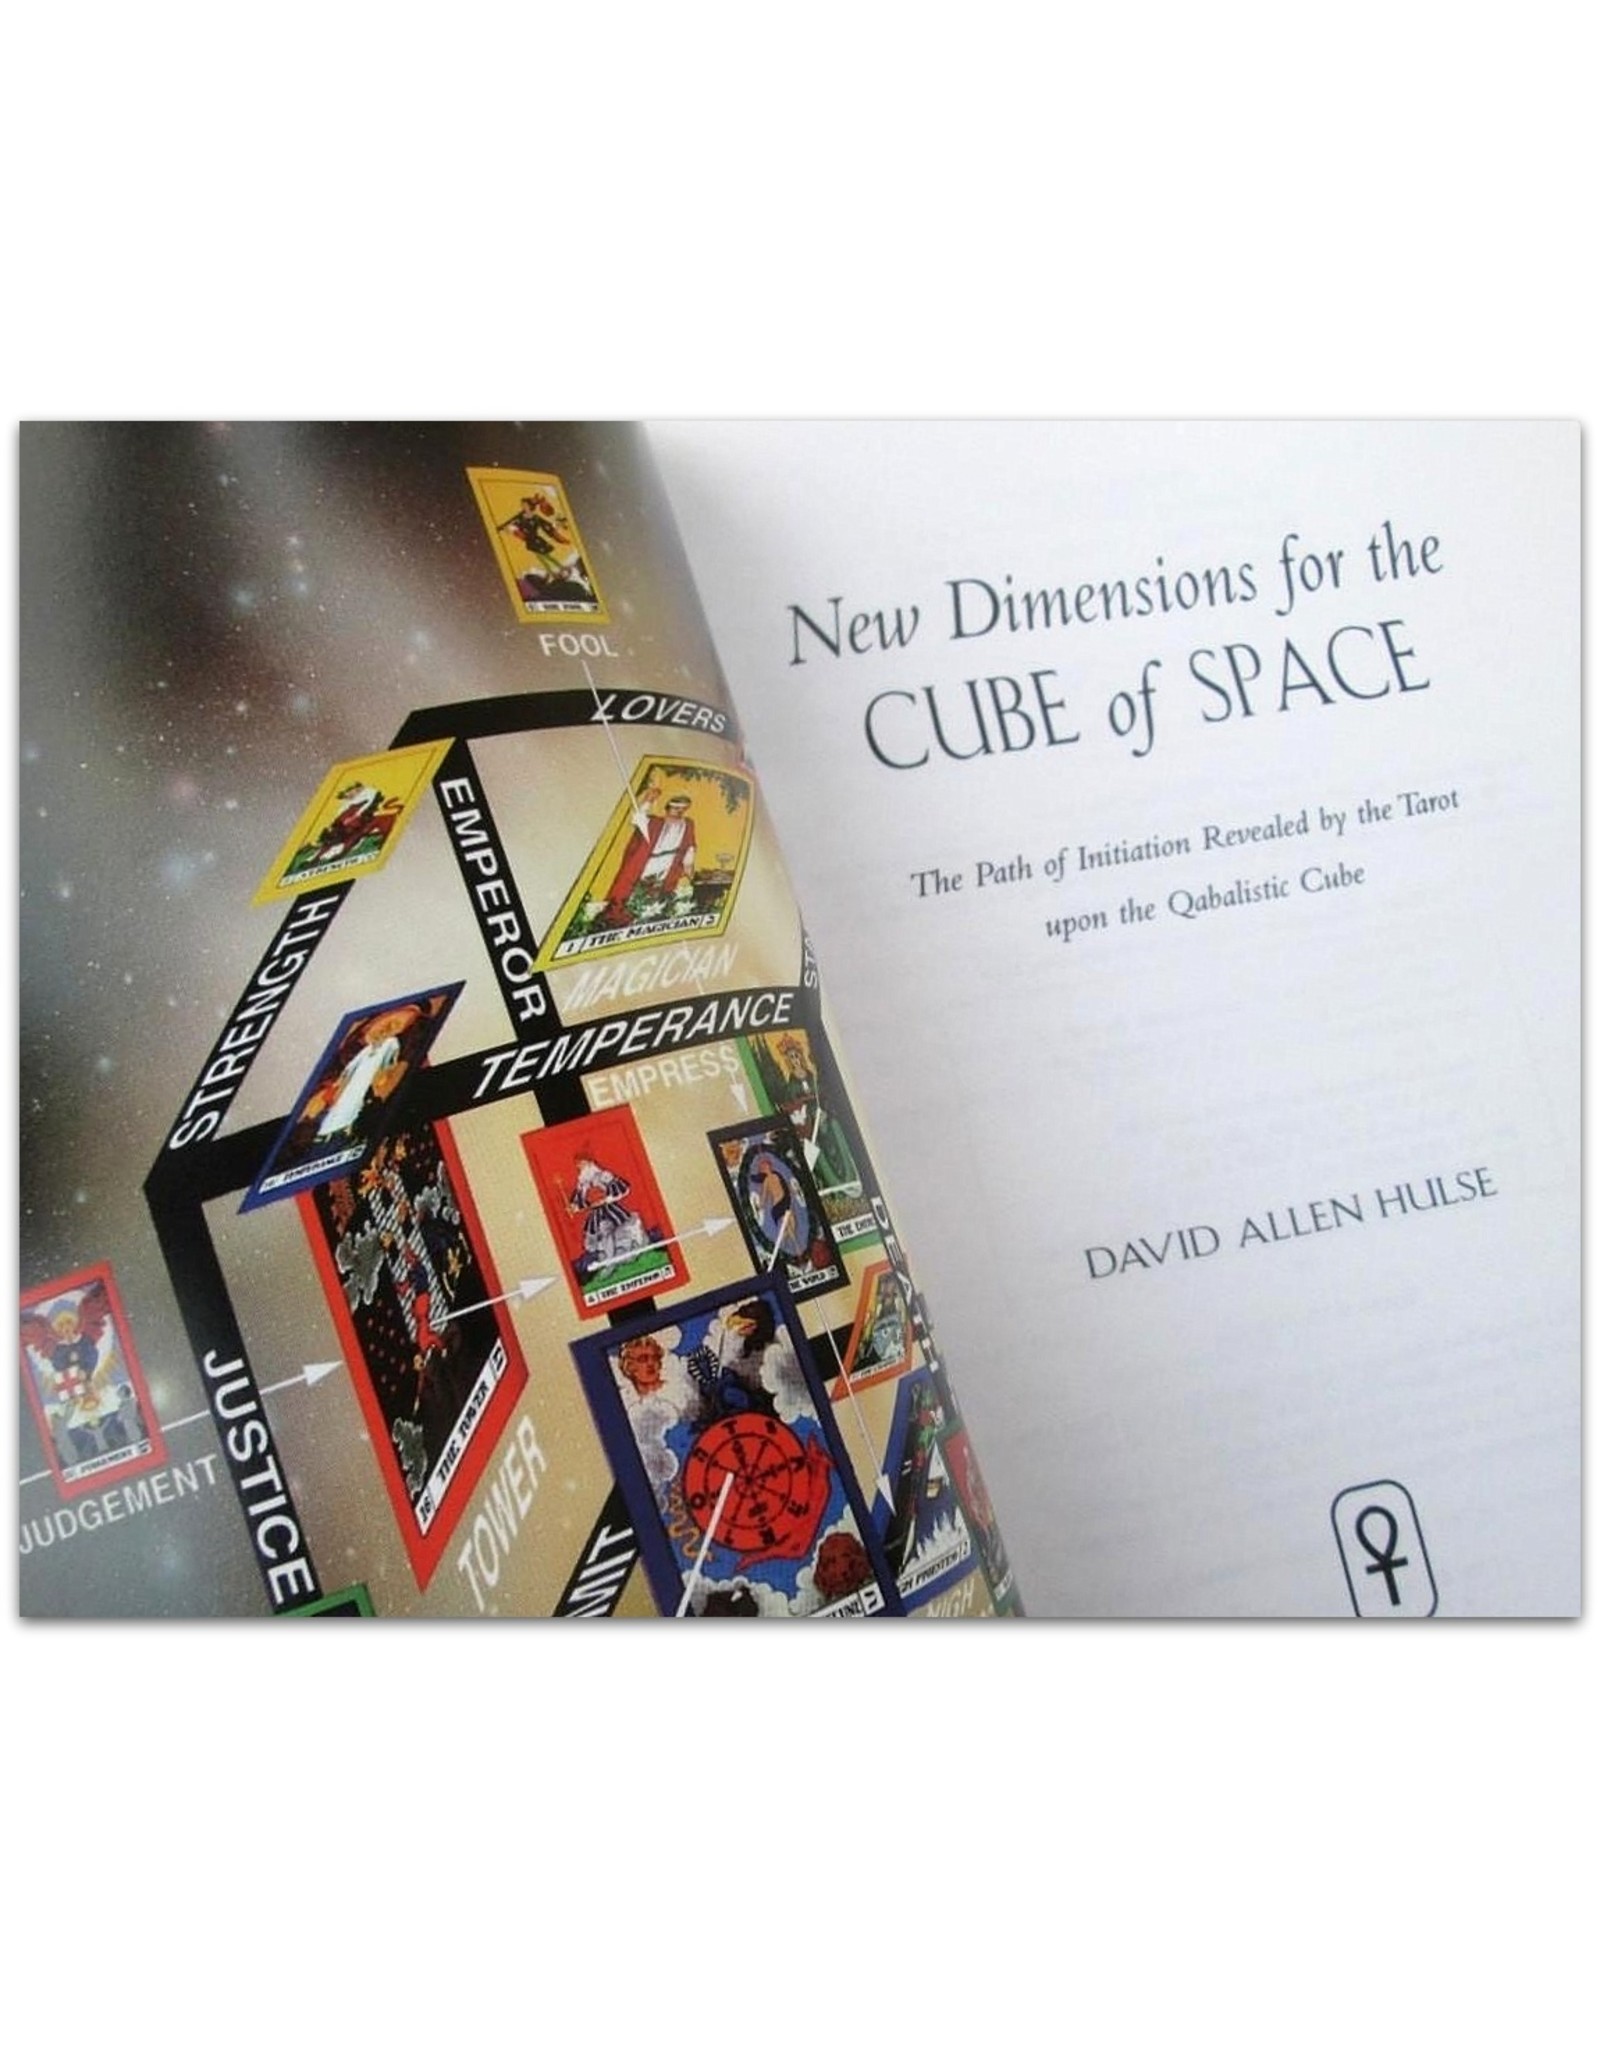 David Allen Hulse - New Dimensions for the Cube of Space. The Path of Initiation Revealed by the Tarot upon the Qabalistic Cube